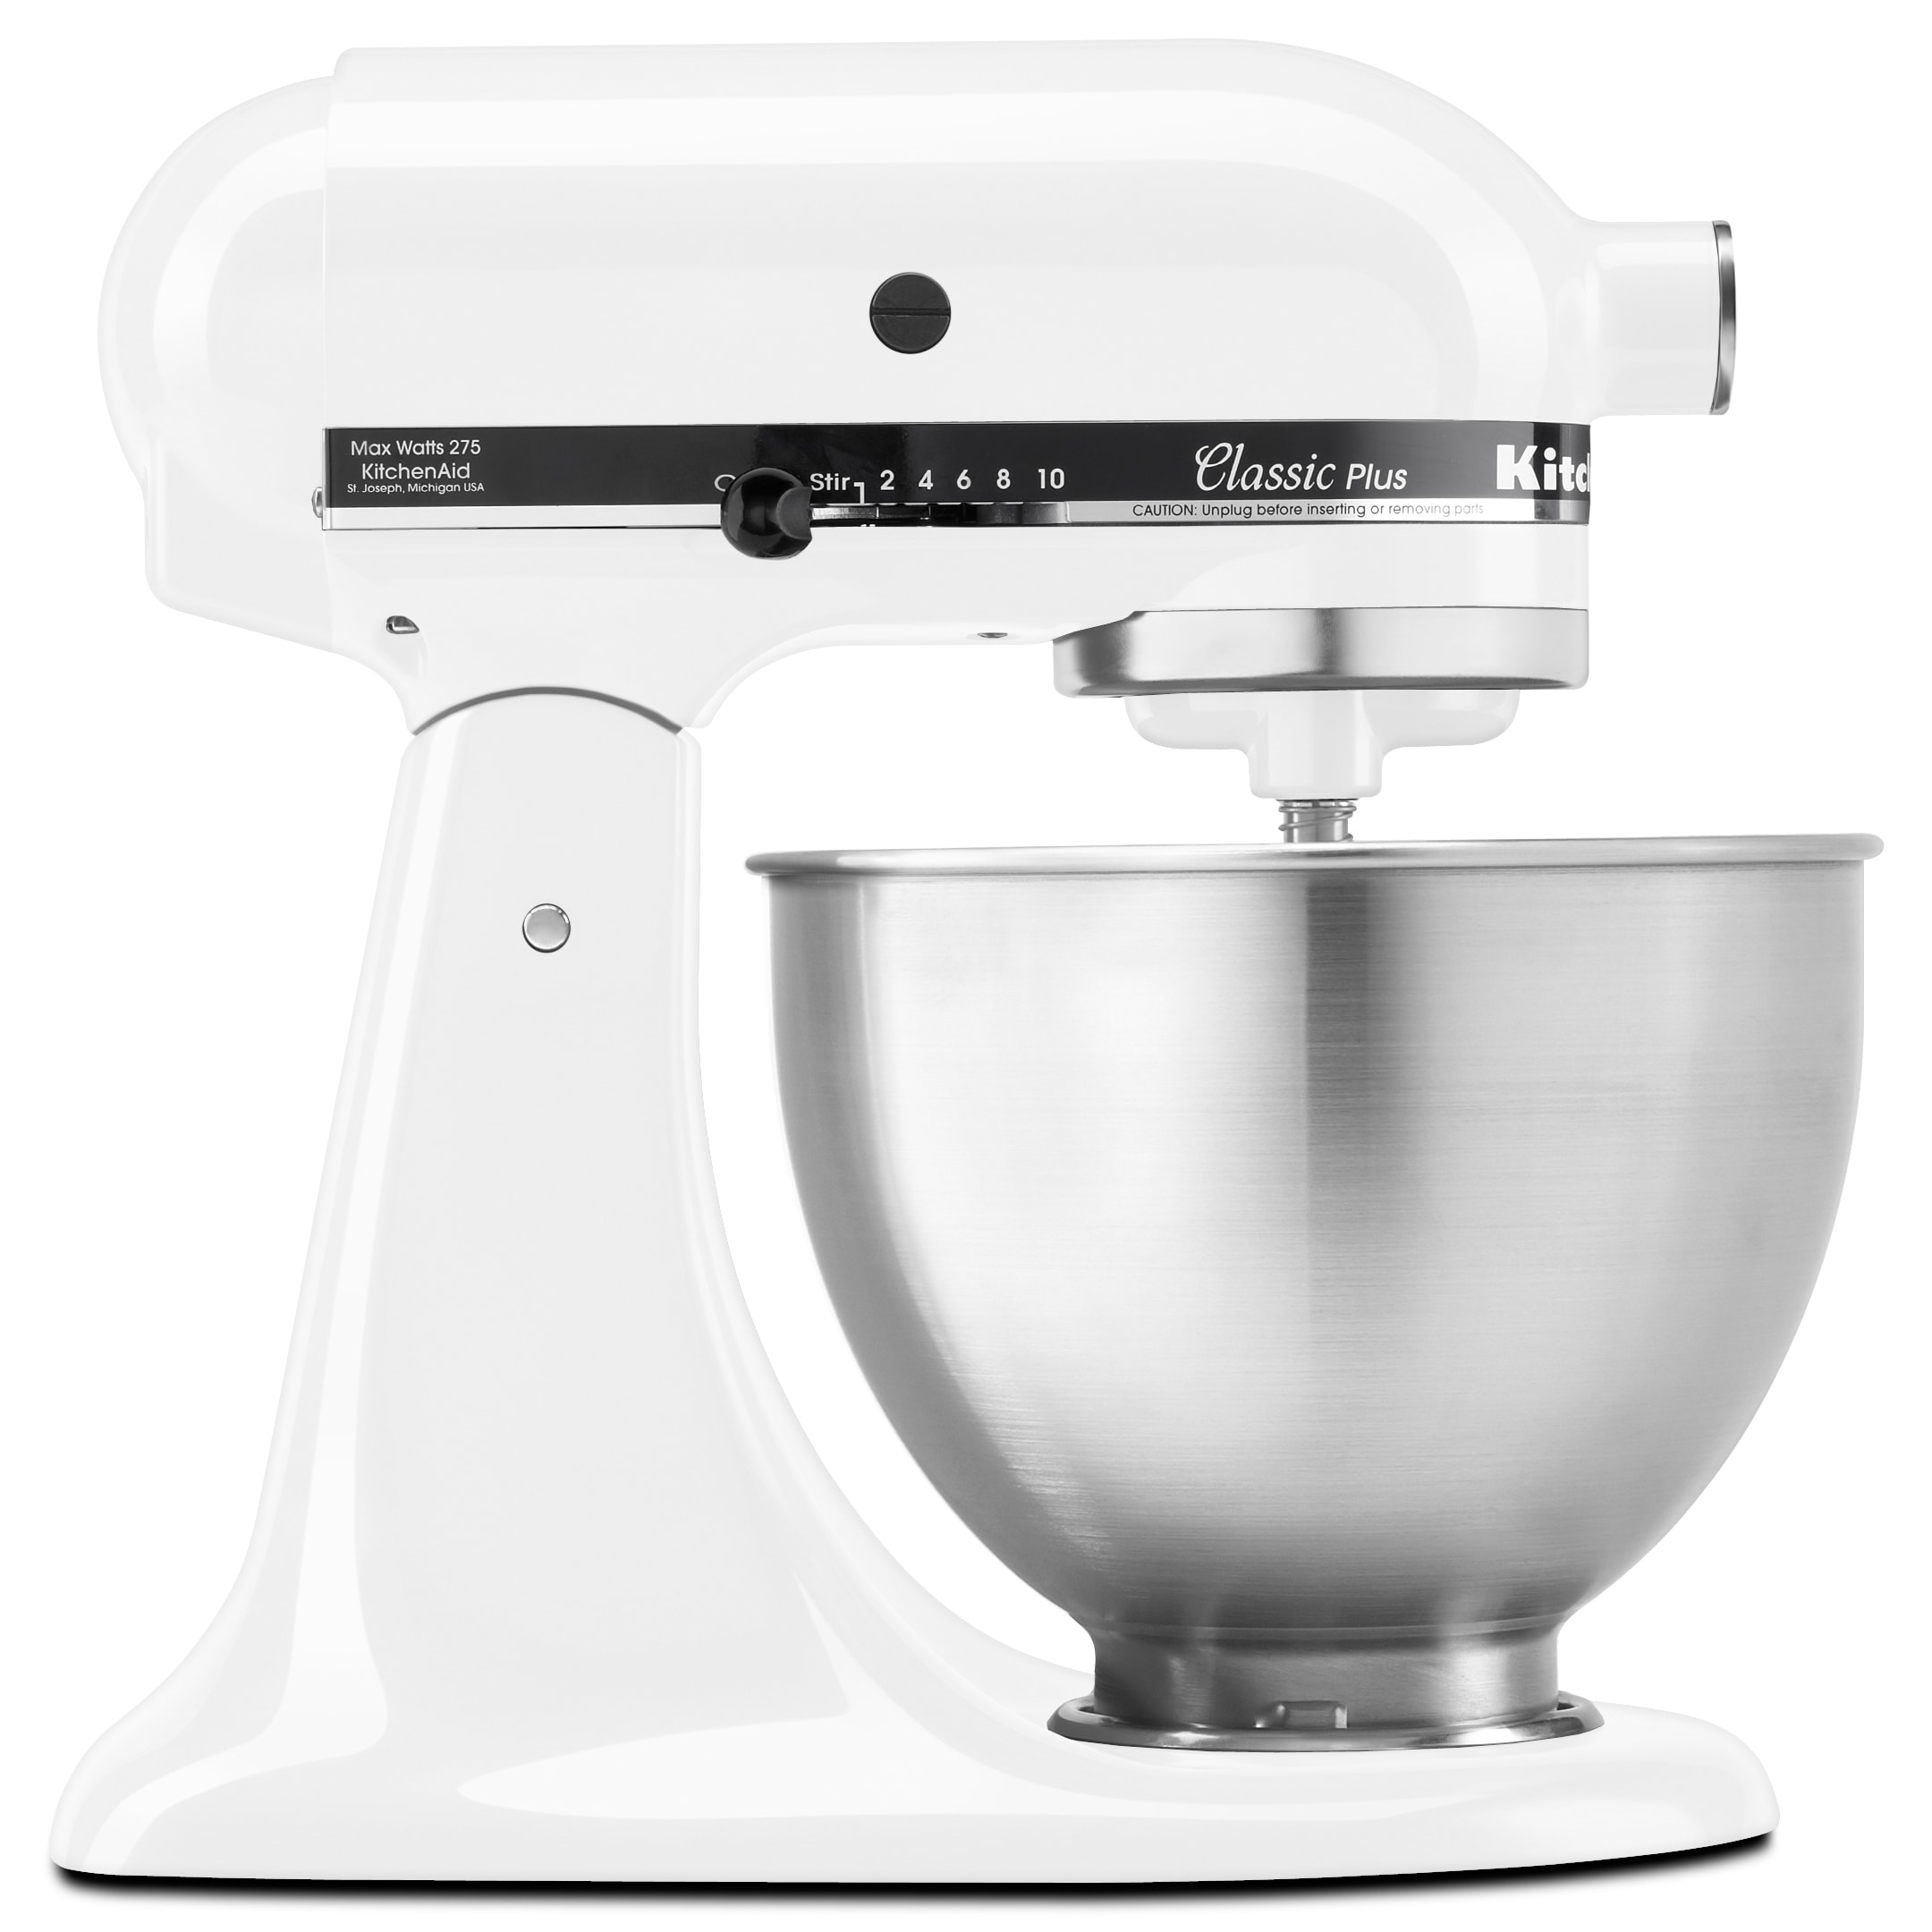 KitchenAid Stand Mixer Classic Column White 5-Qt. Ceramic Mixing Bowl with  Spout and Handle + Reviews